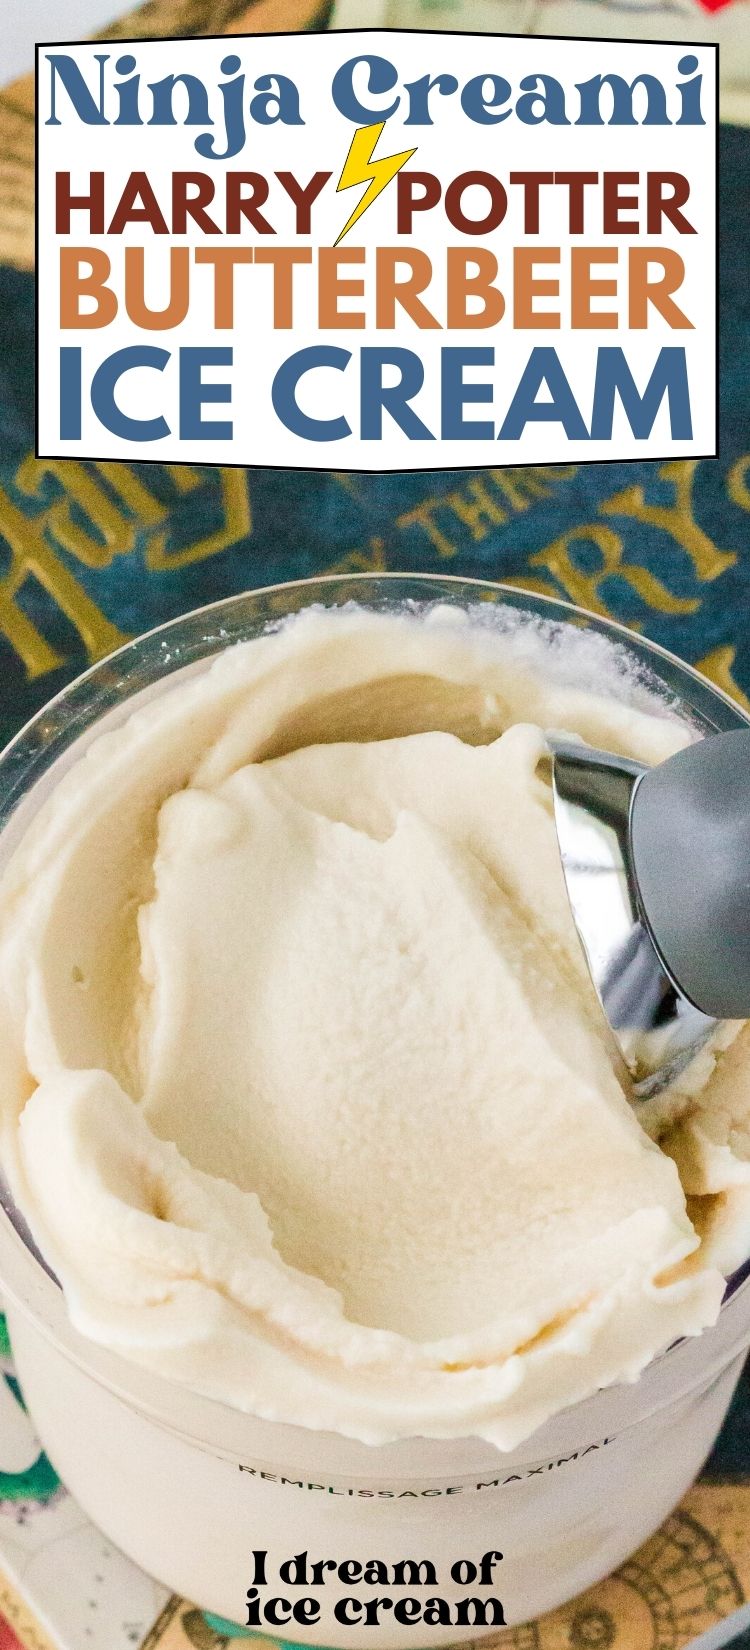 overhead view of the top of a Ninja Creami pint container filled with butterbeer ice cream, inspired by the Harry Potter books and movies.